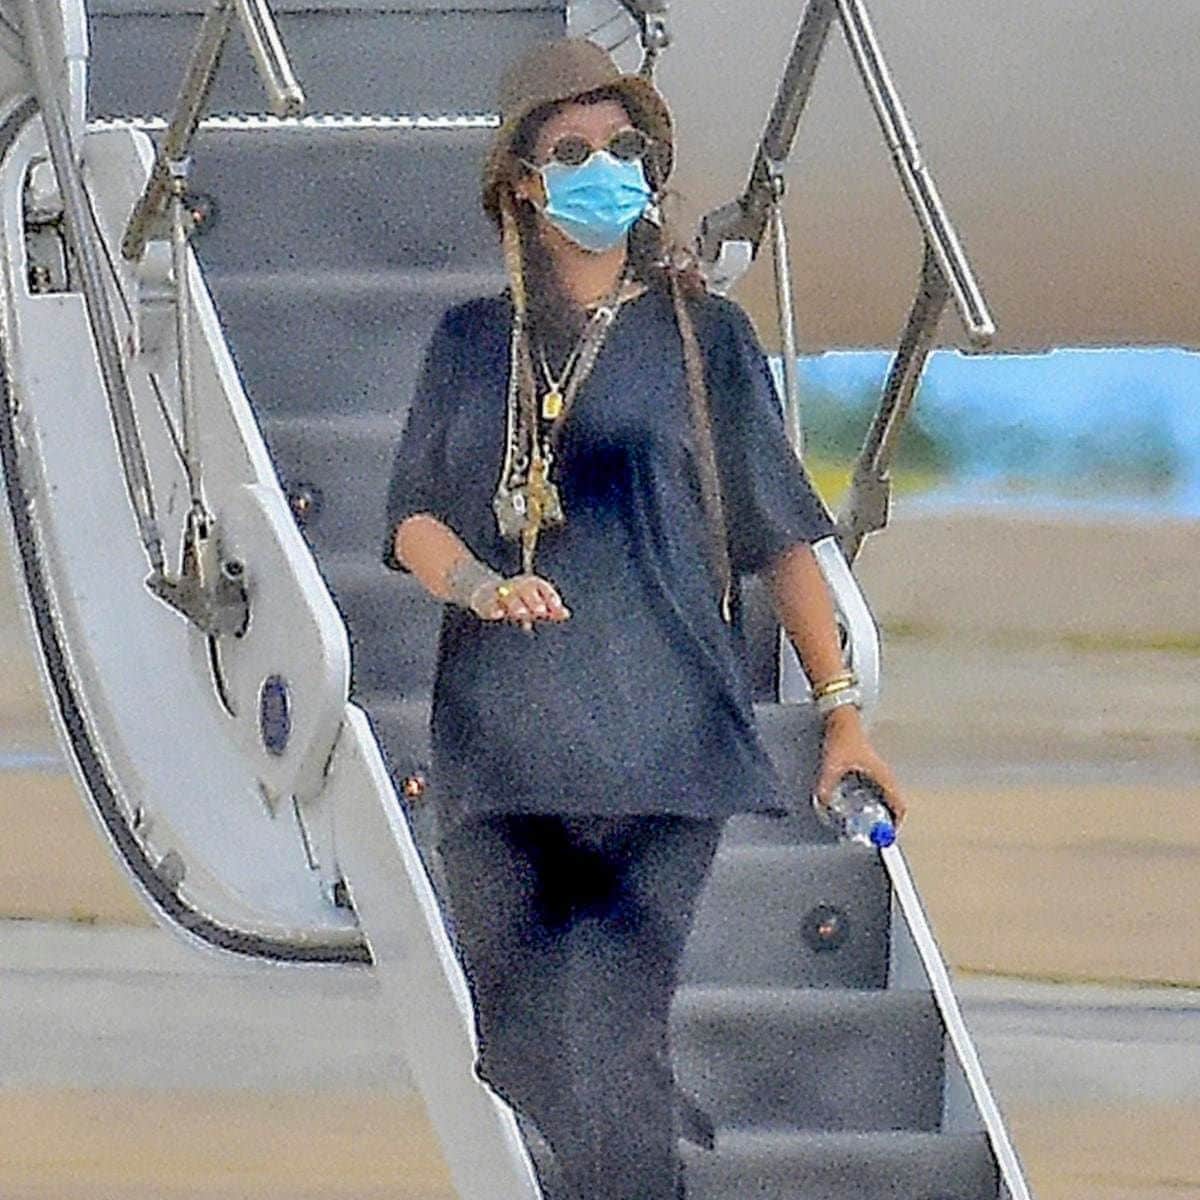 Rihanna pictured wearing a protective face mask and a lot of bling.